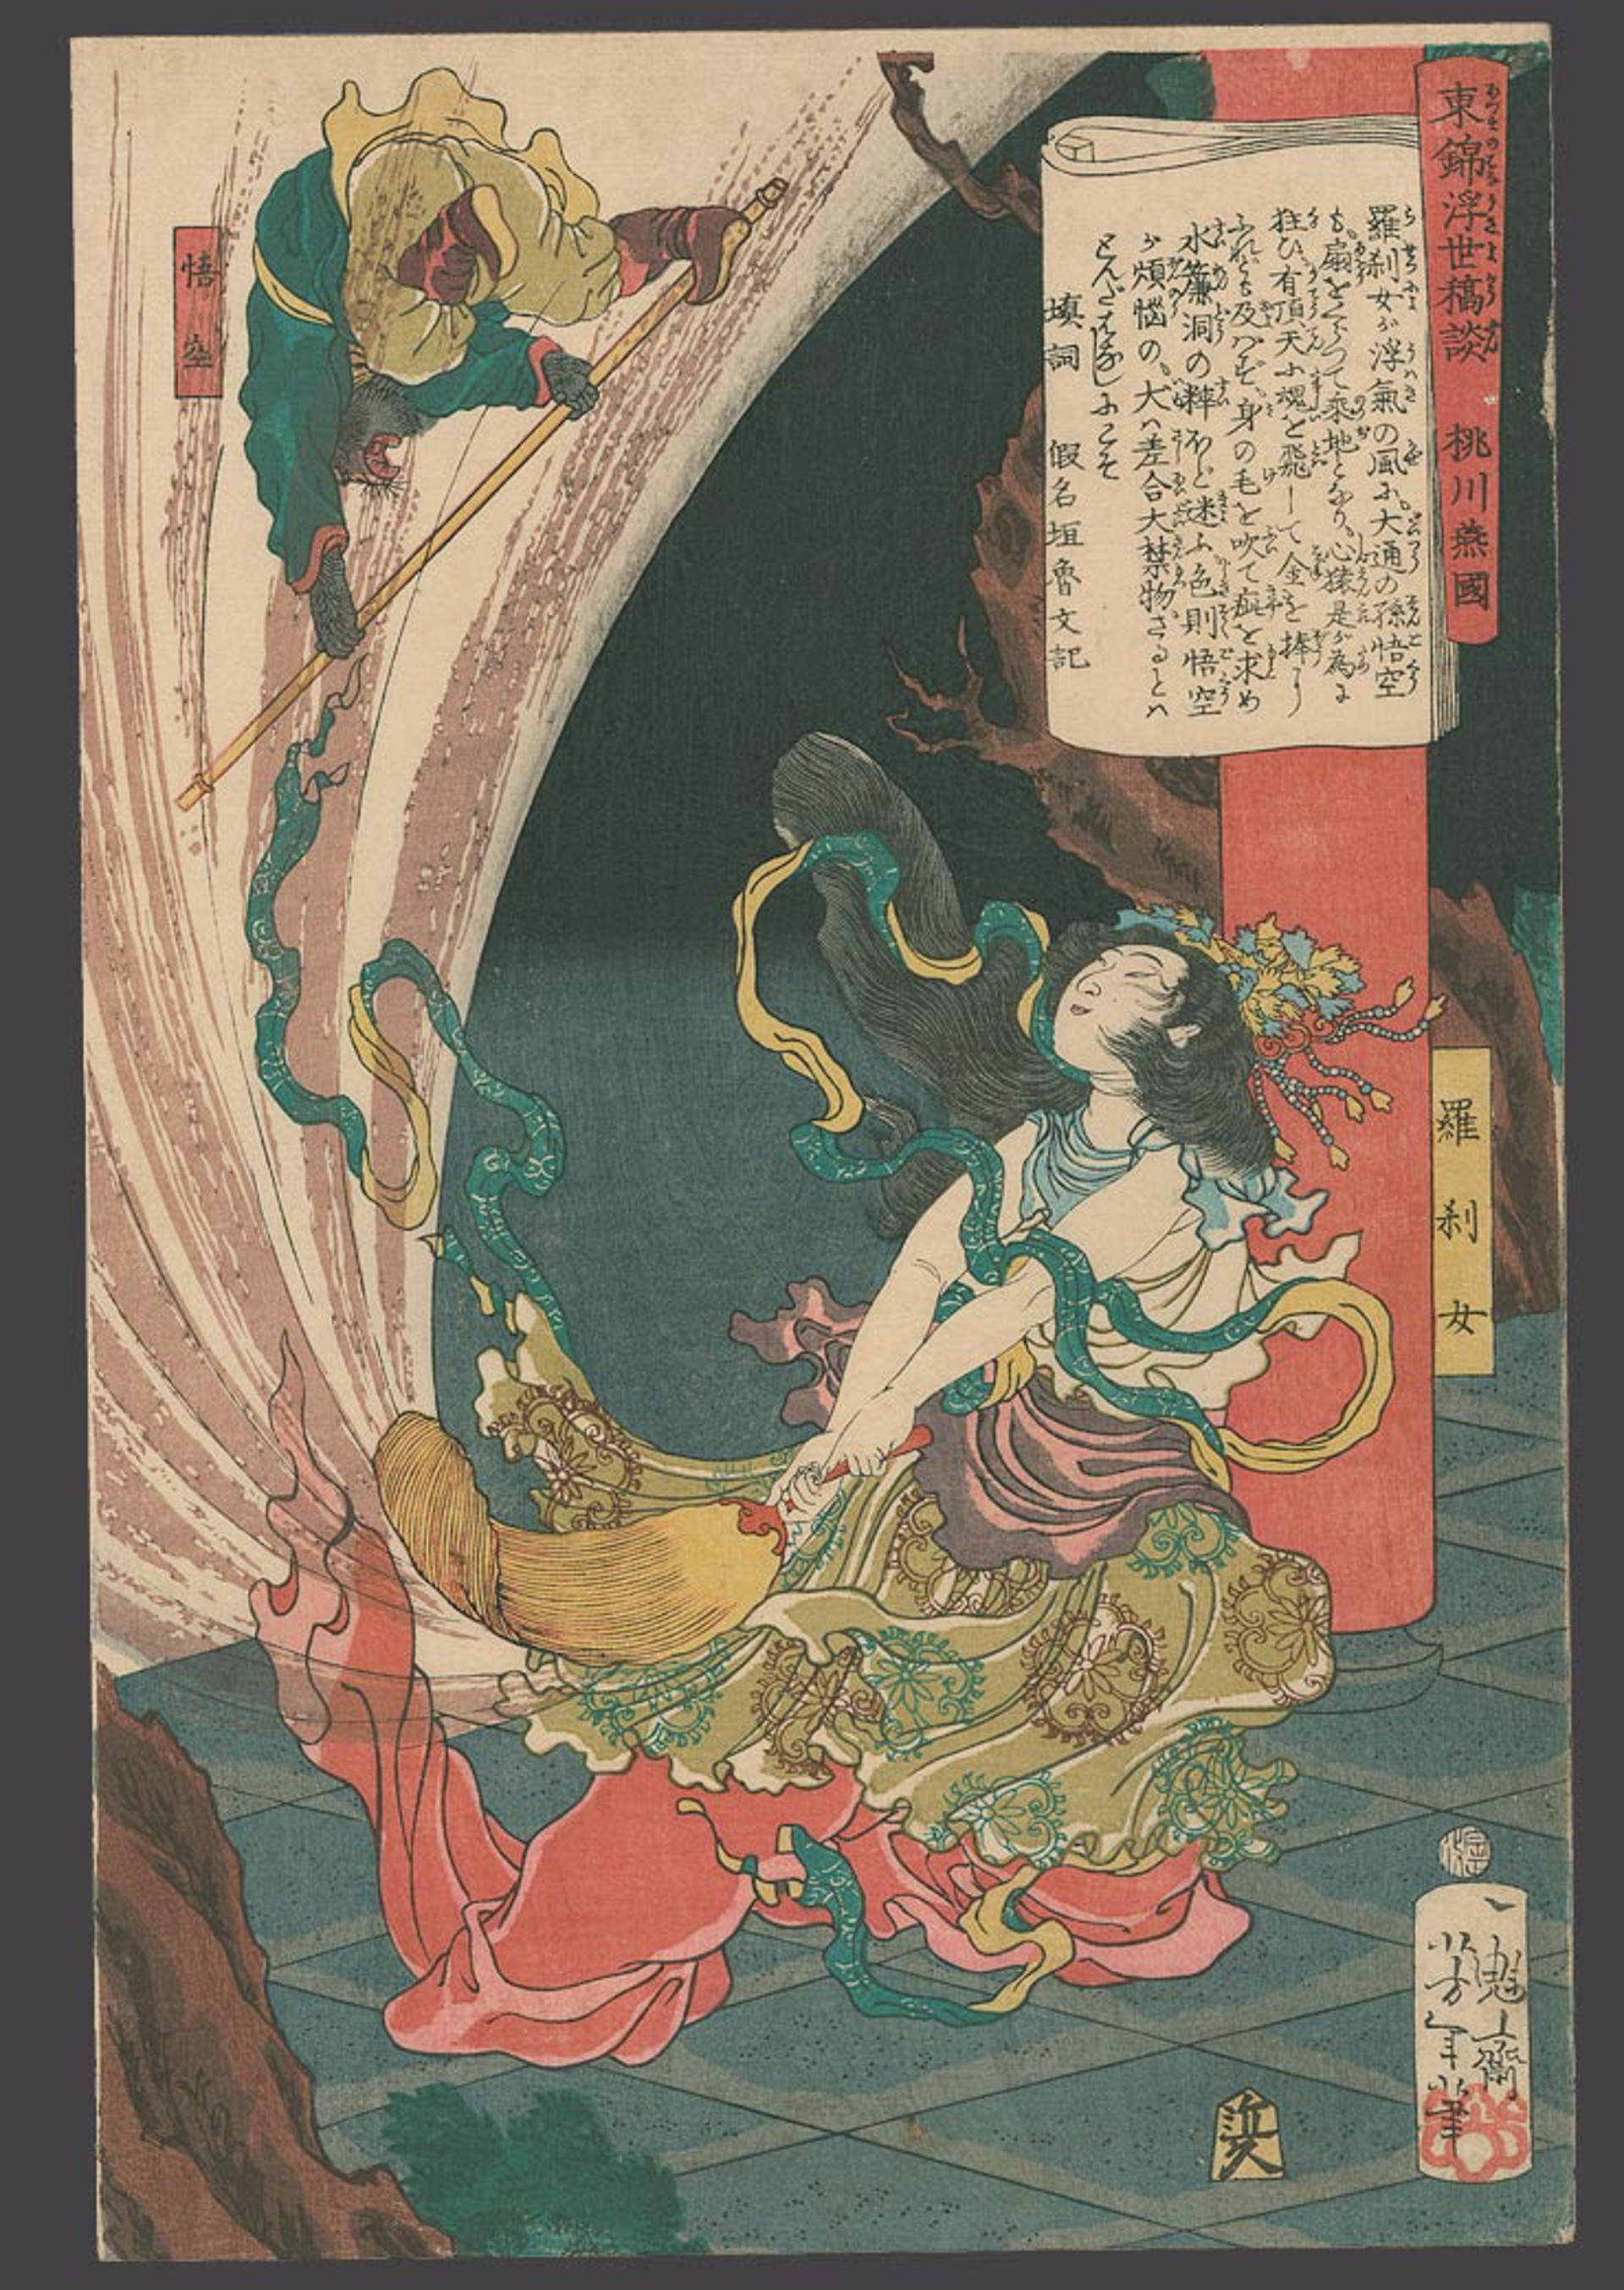 The monkey Songoku, a companion of Priest Sanzo, battling Rasetsunyo, a wicked magician. Tales of the Floating World on Eastern Brocade by Yoshitoshi